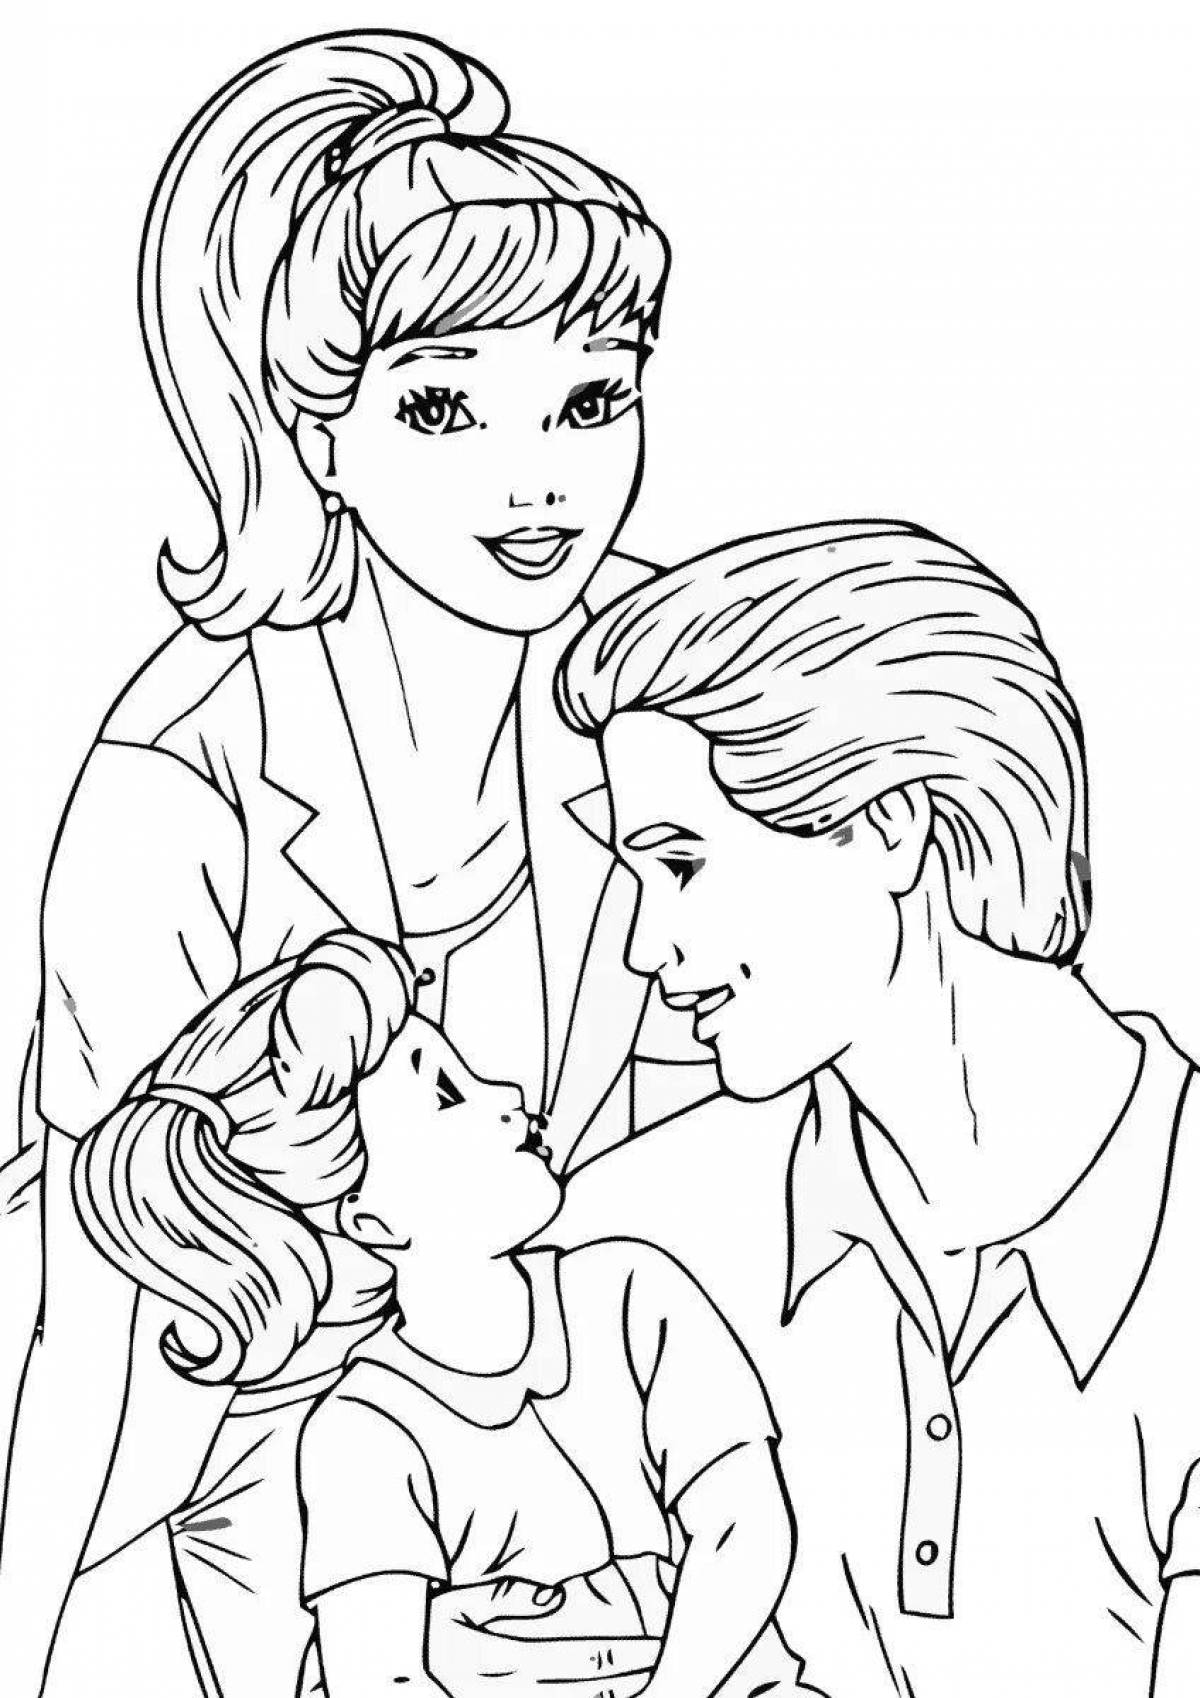 Charming daughter coloring page